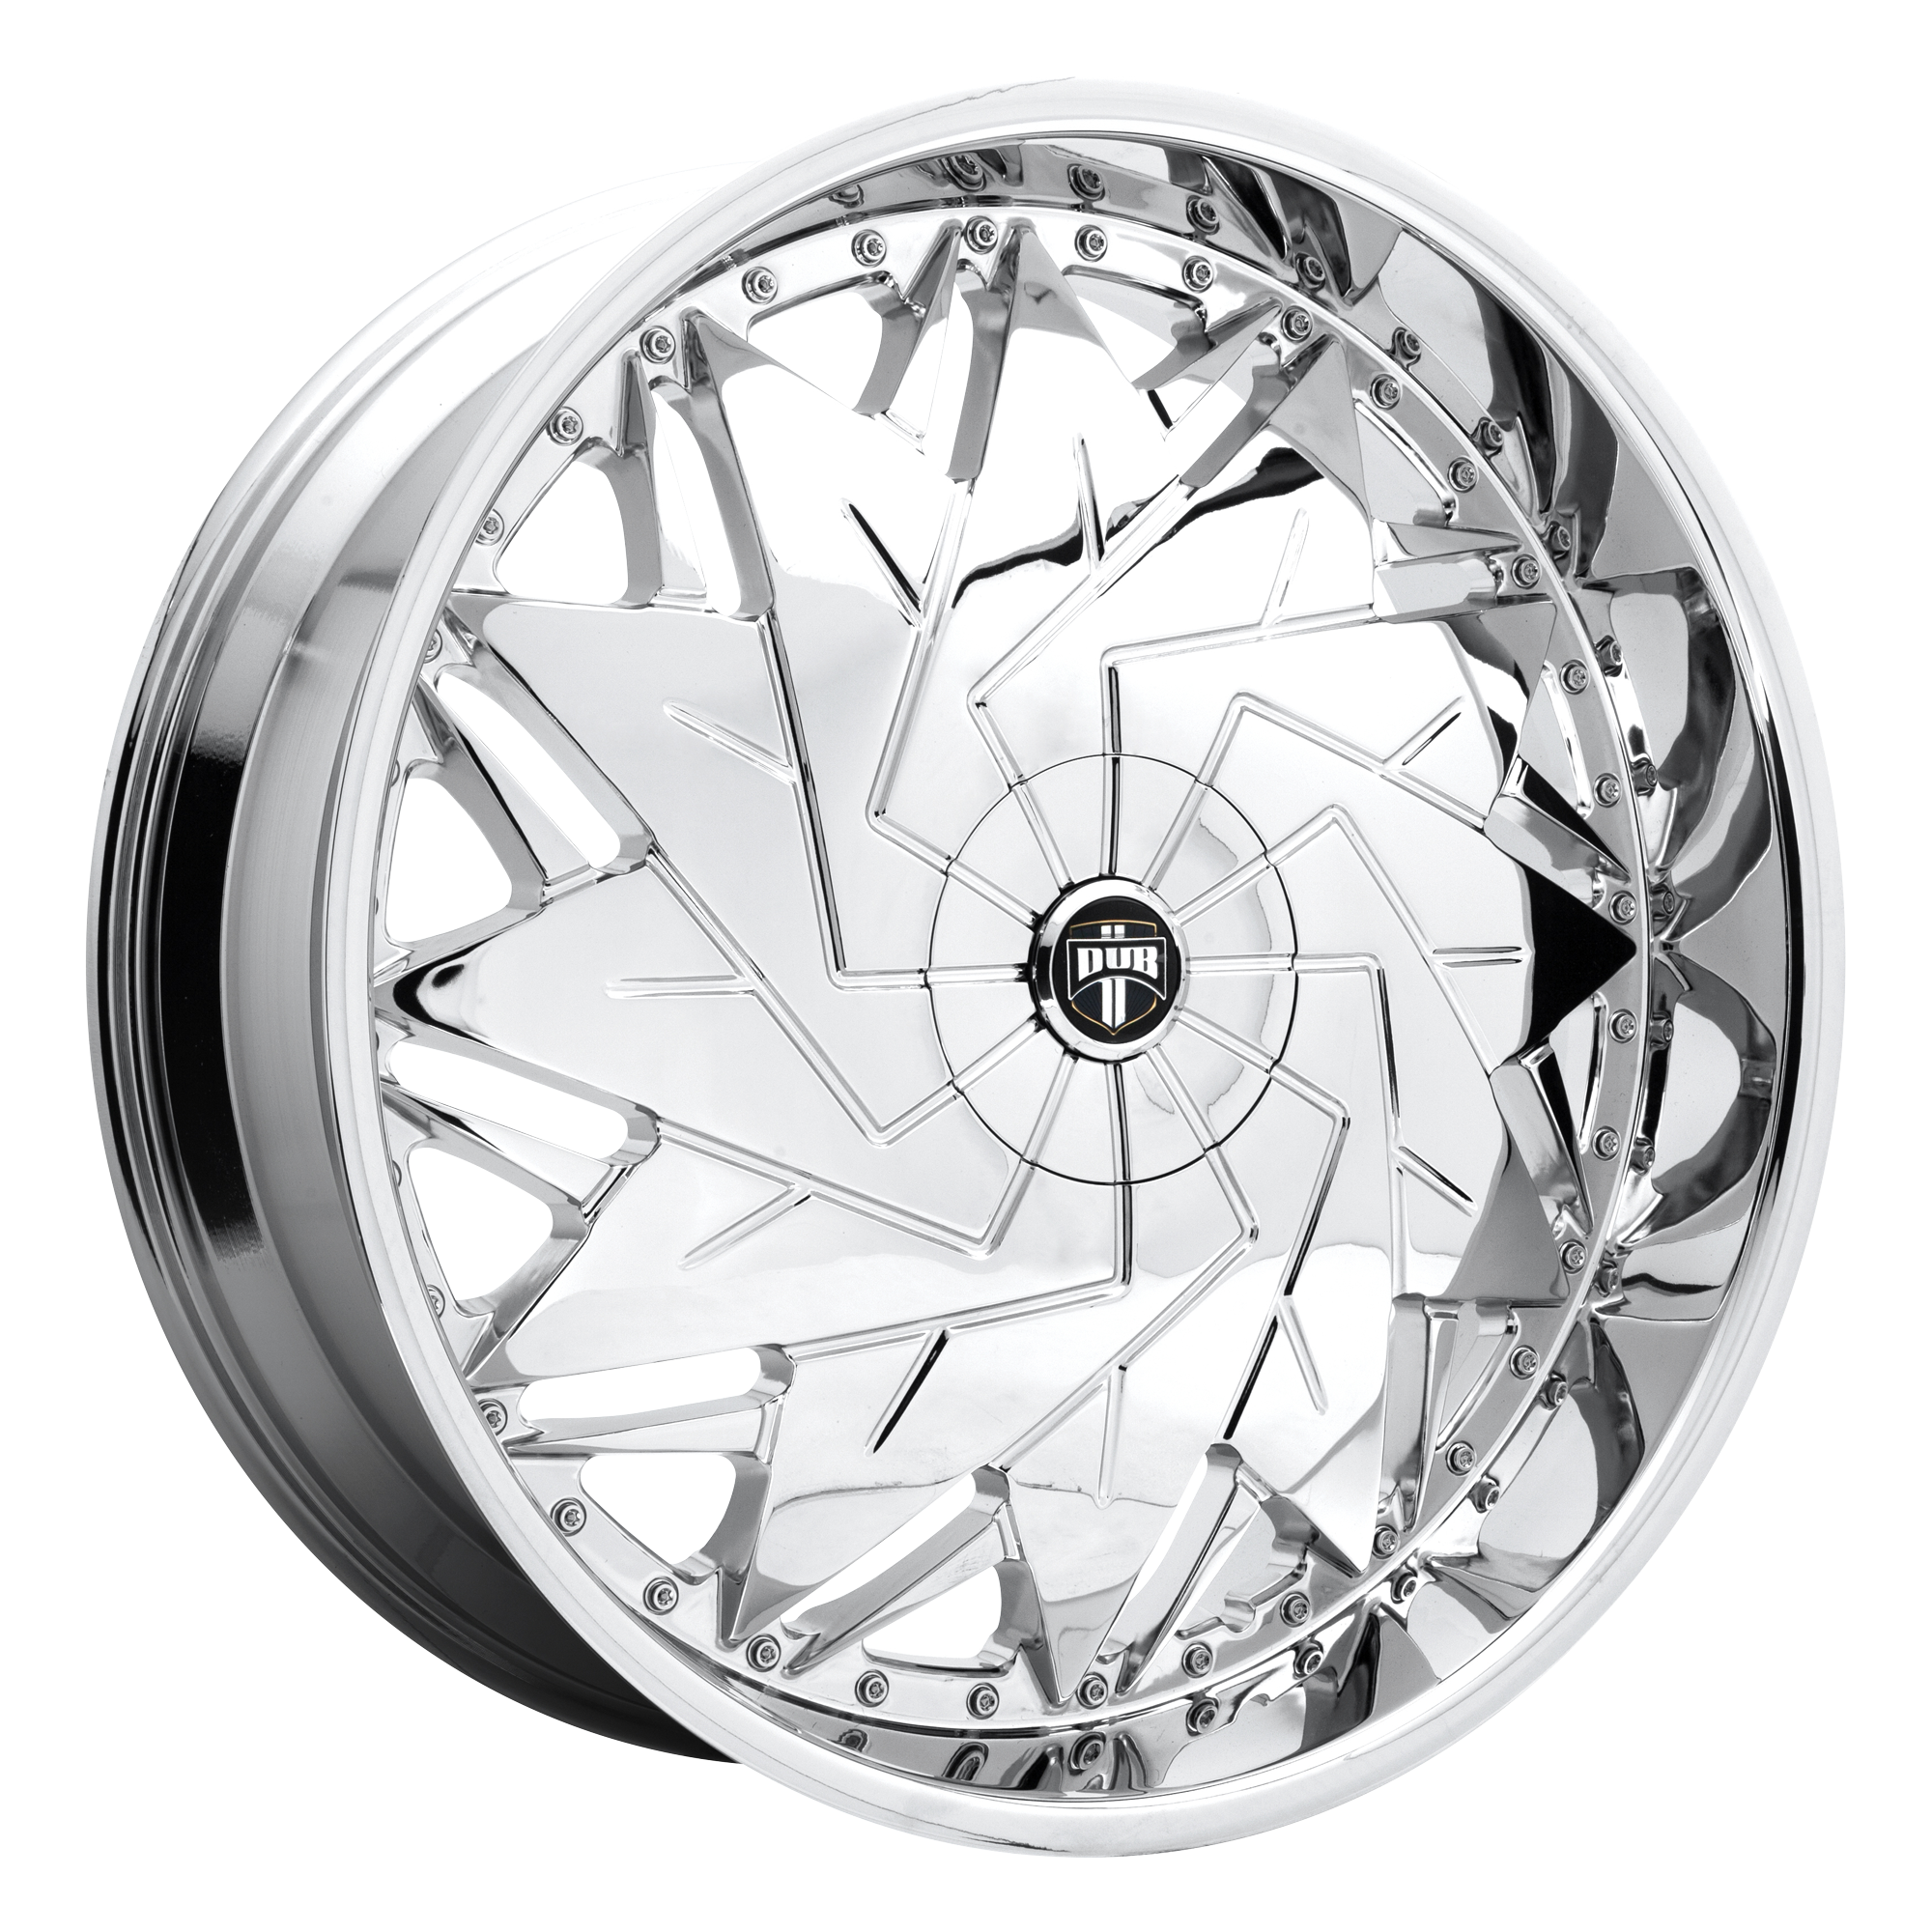 DAZR 26x9 5x114.30/5x120.00 CHROME PLATED (25 mm) - Tires and Engine Performance